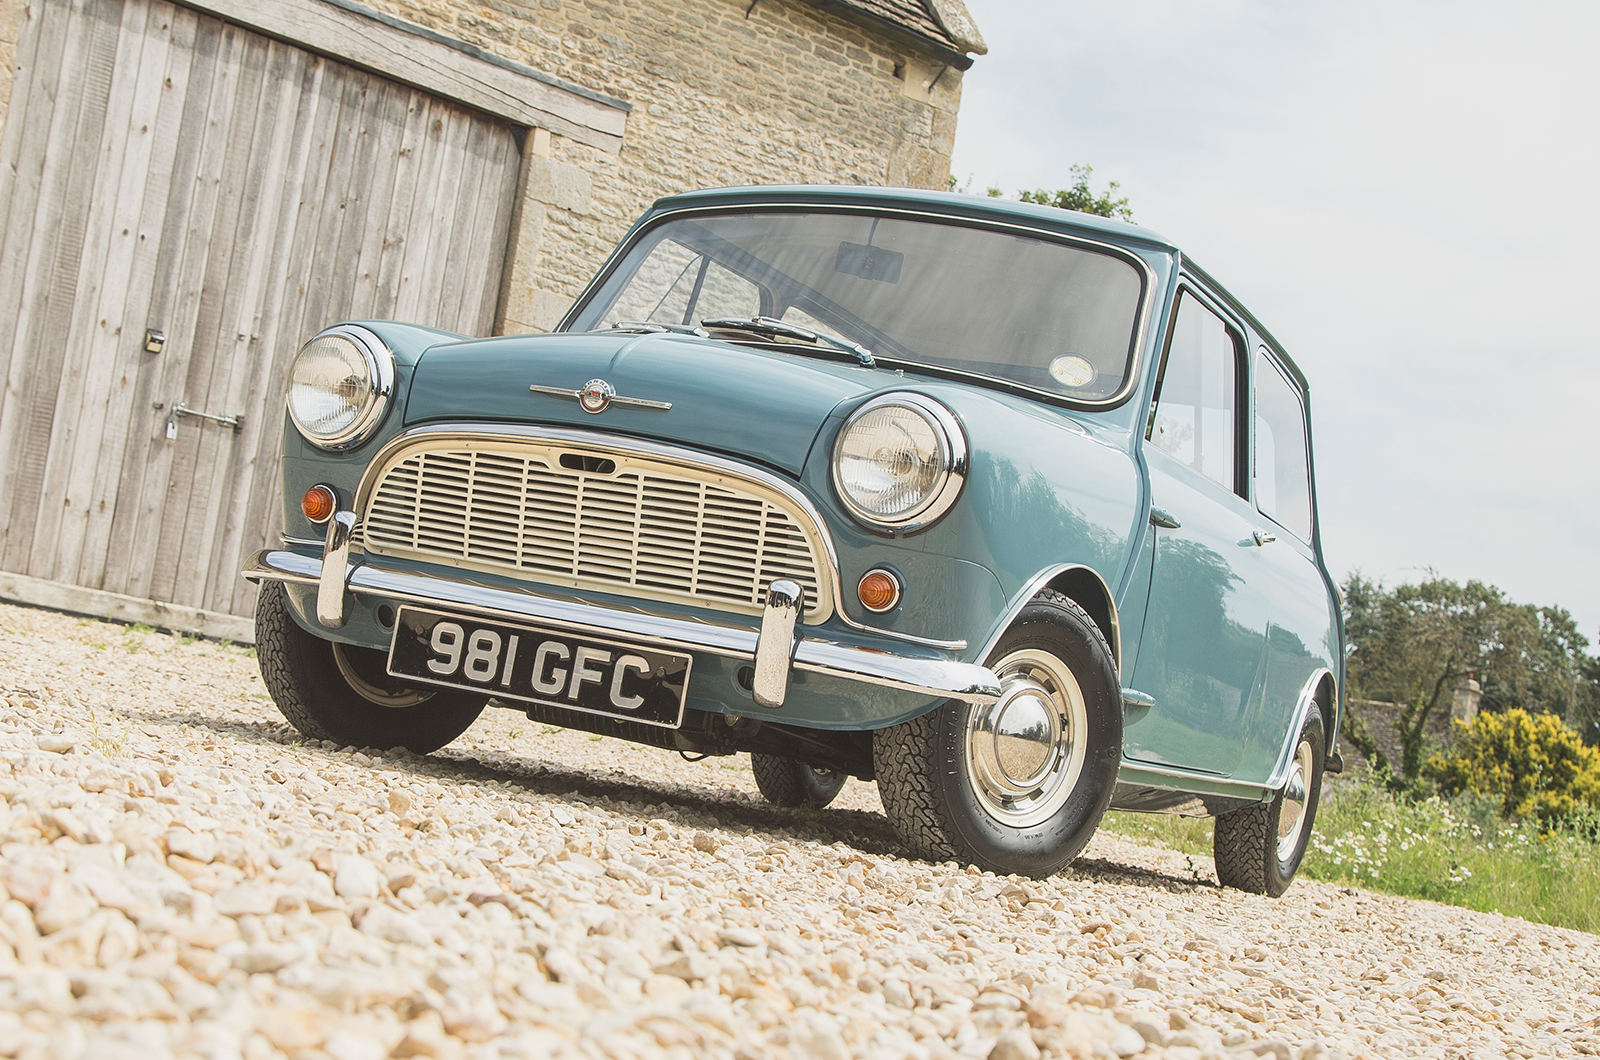 The classic Mini with a scarcely believable story